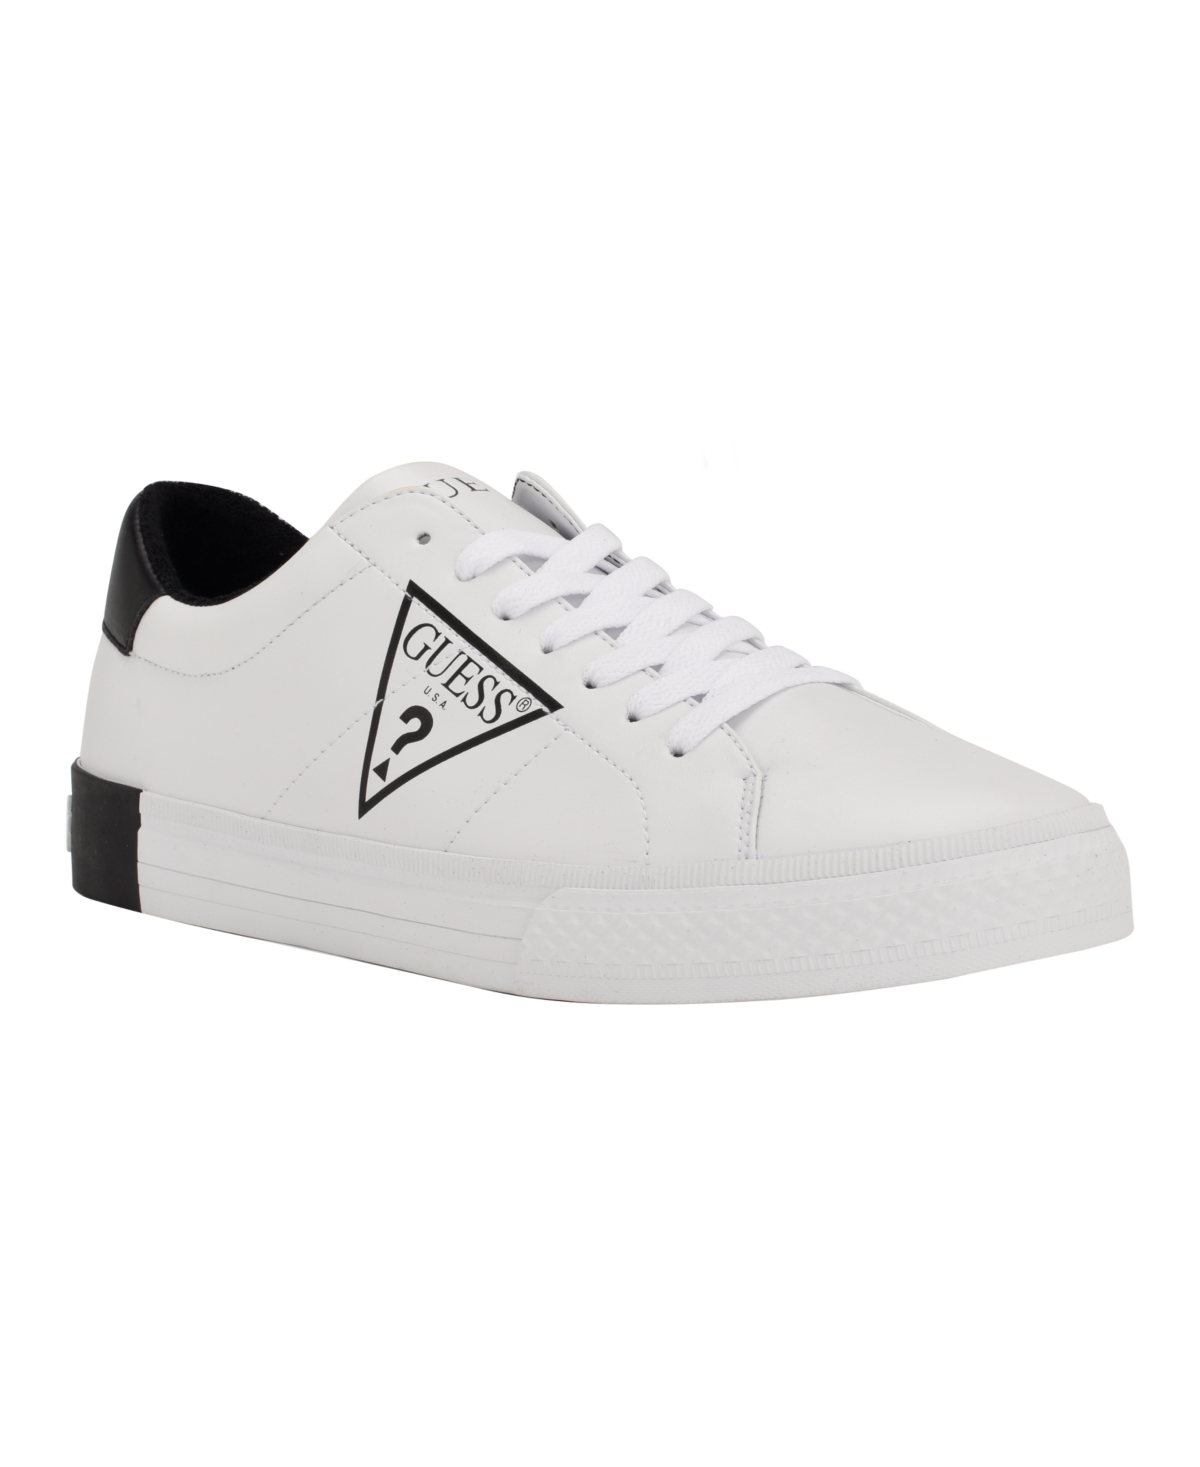 Guess Casual Low Top Lace Up Sneakers Men's Shoes In White/black ModeSens